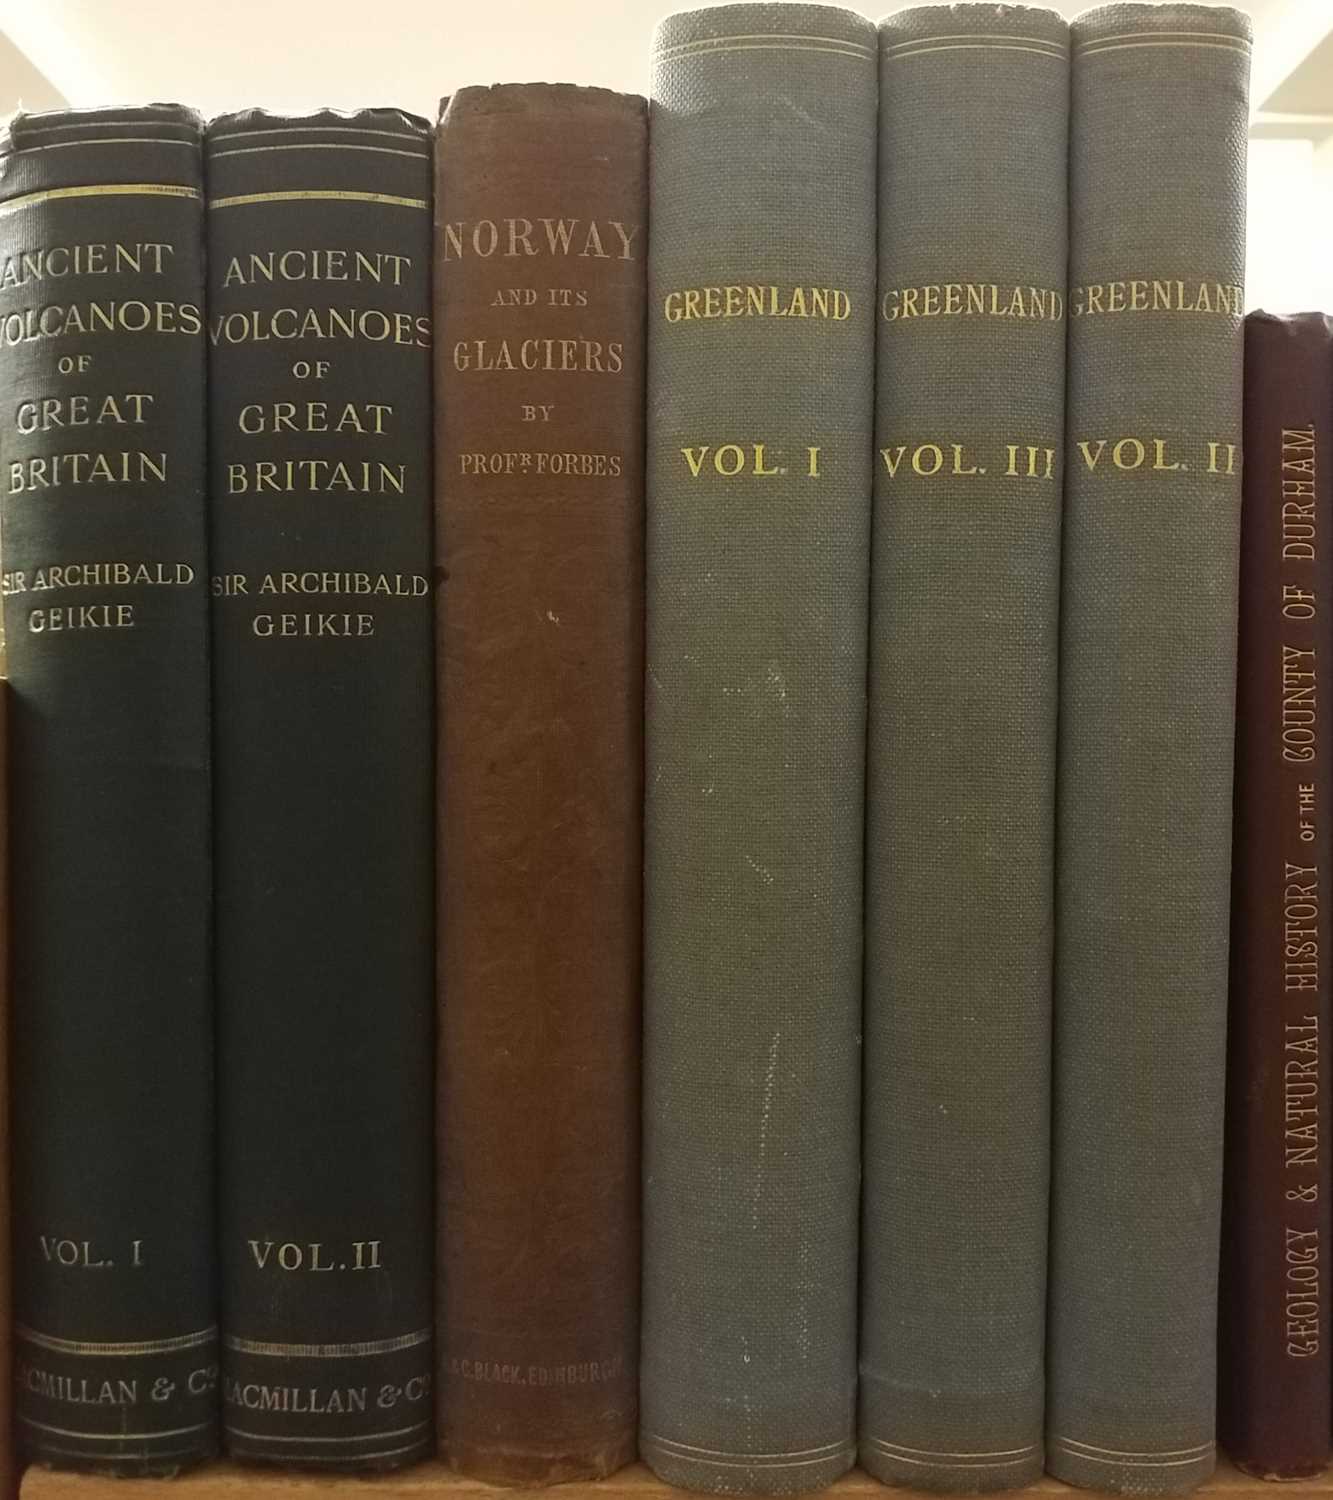 Lot 93 - Geikie (Archibald). The Ancient Volcanoes of Great Britain,  2 volumes, London: Macmillan and Co., 1897